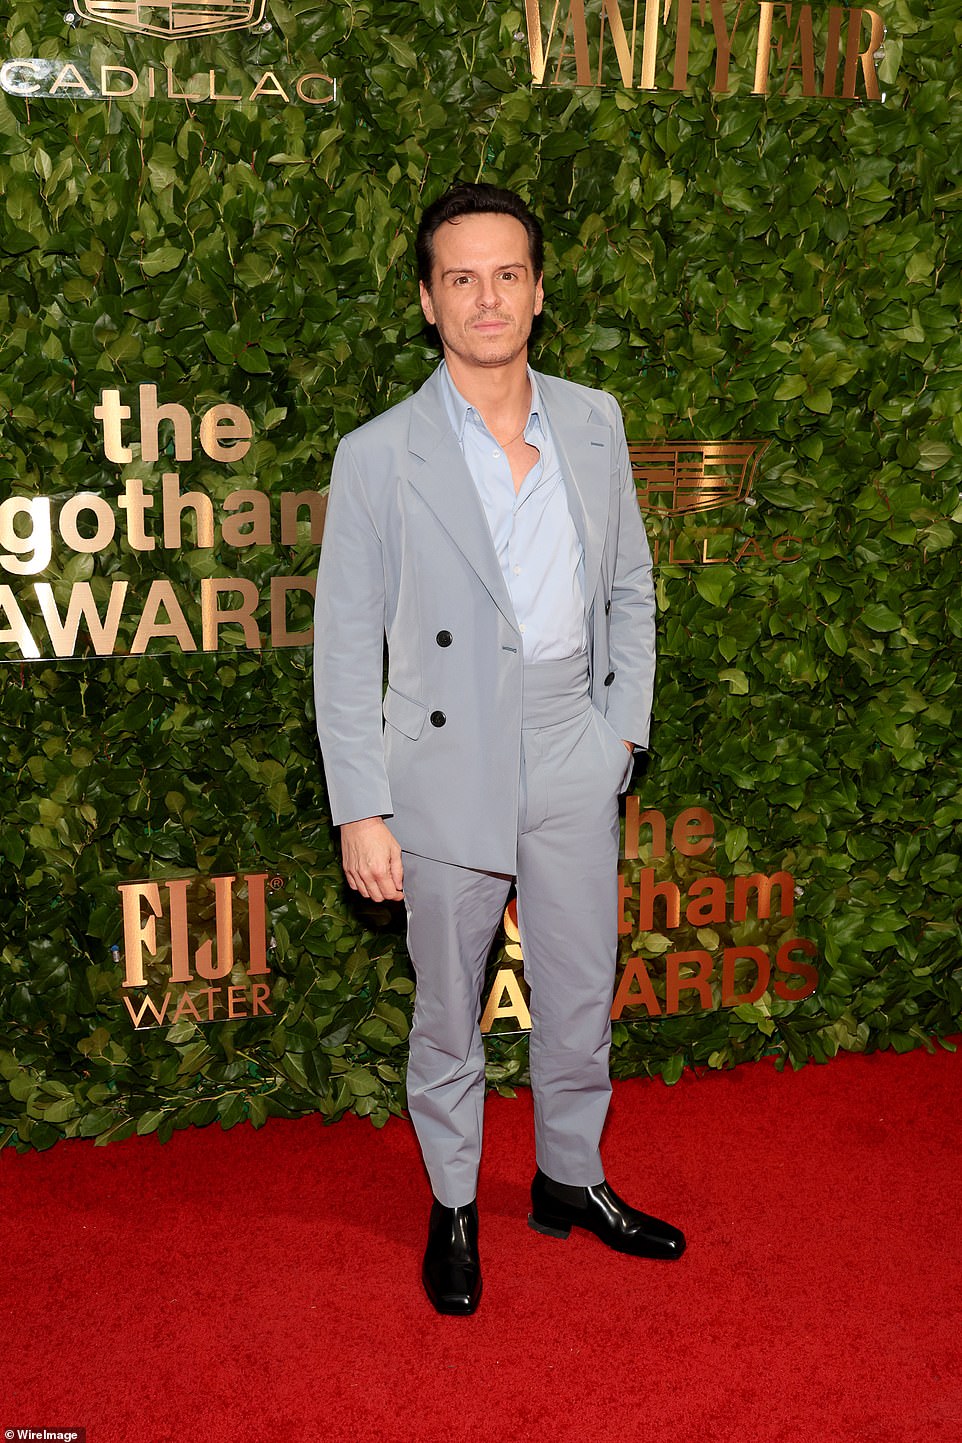 Andrew Scott, who was nominated for Outstanding Lead Performance, wore a grey suit and blue dress shirt